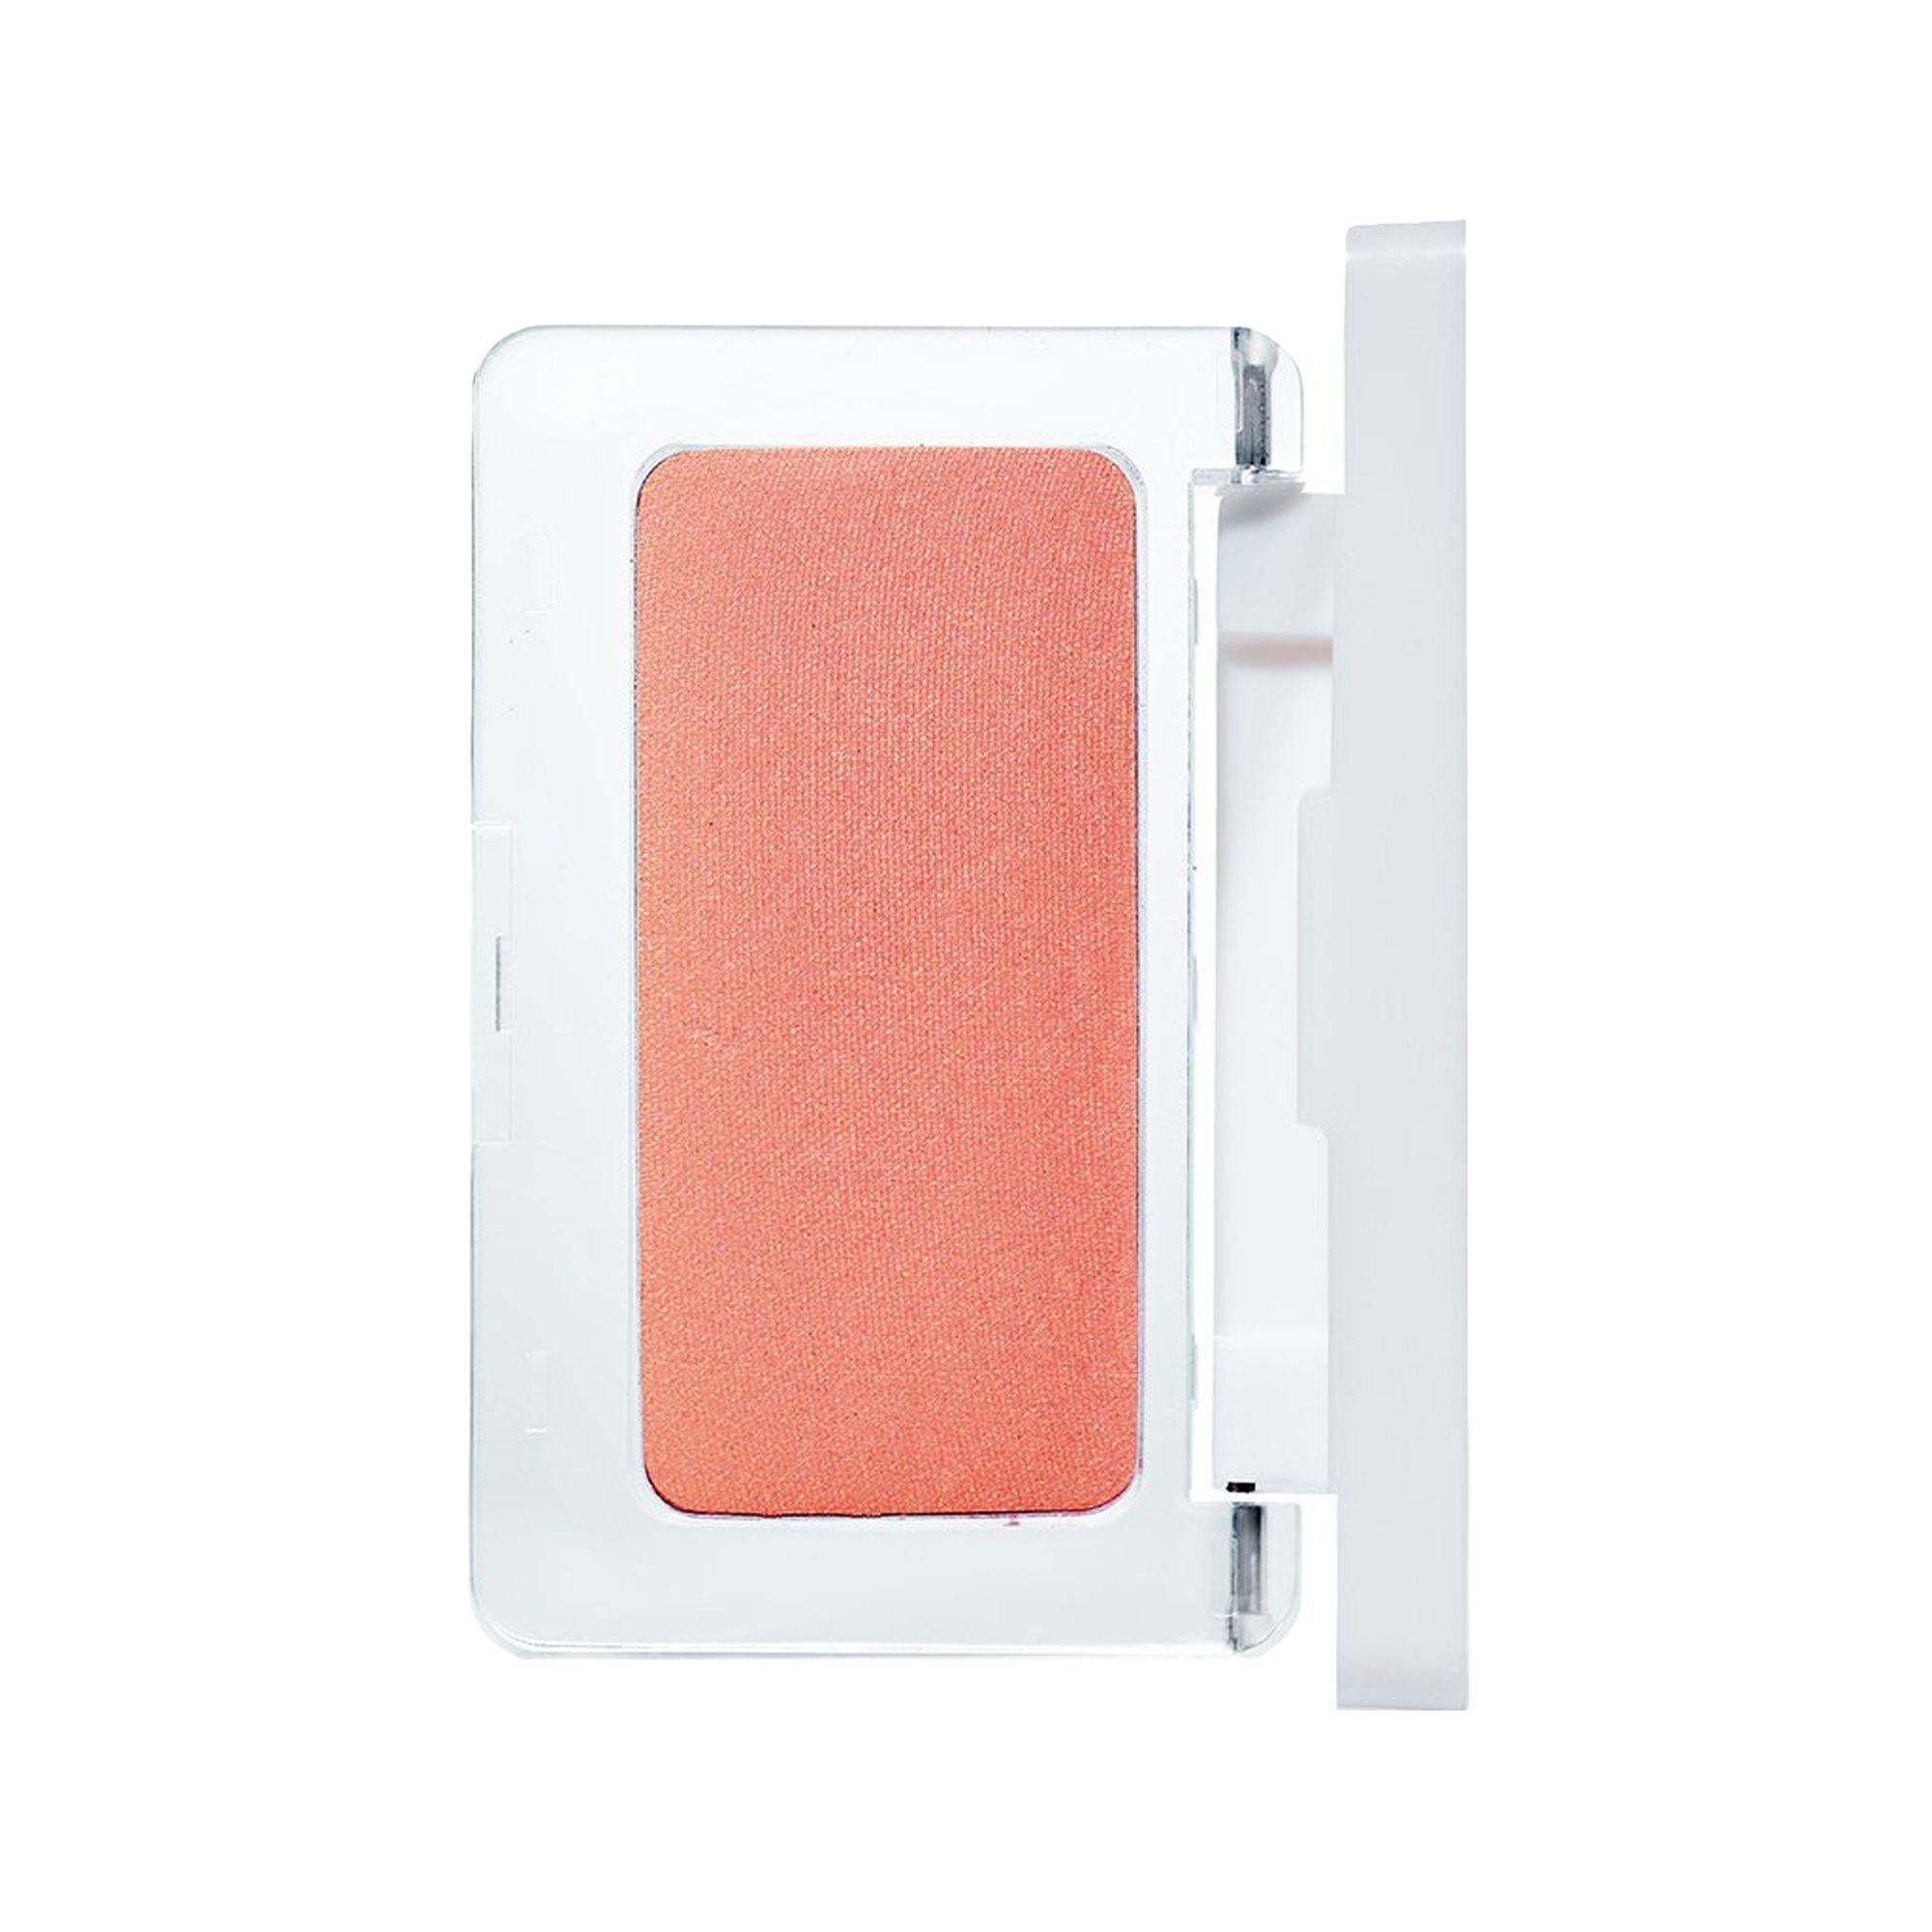 Indisponible - Pressed Blush Blush Compact Unavailable - Pressed Blush Blush Compact - RMS Beauty